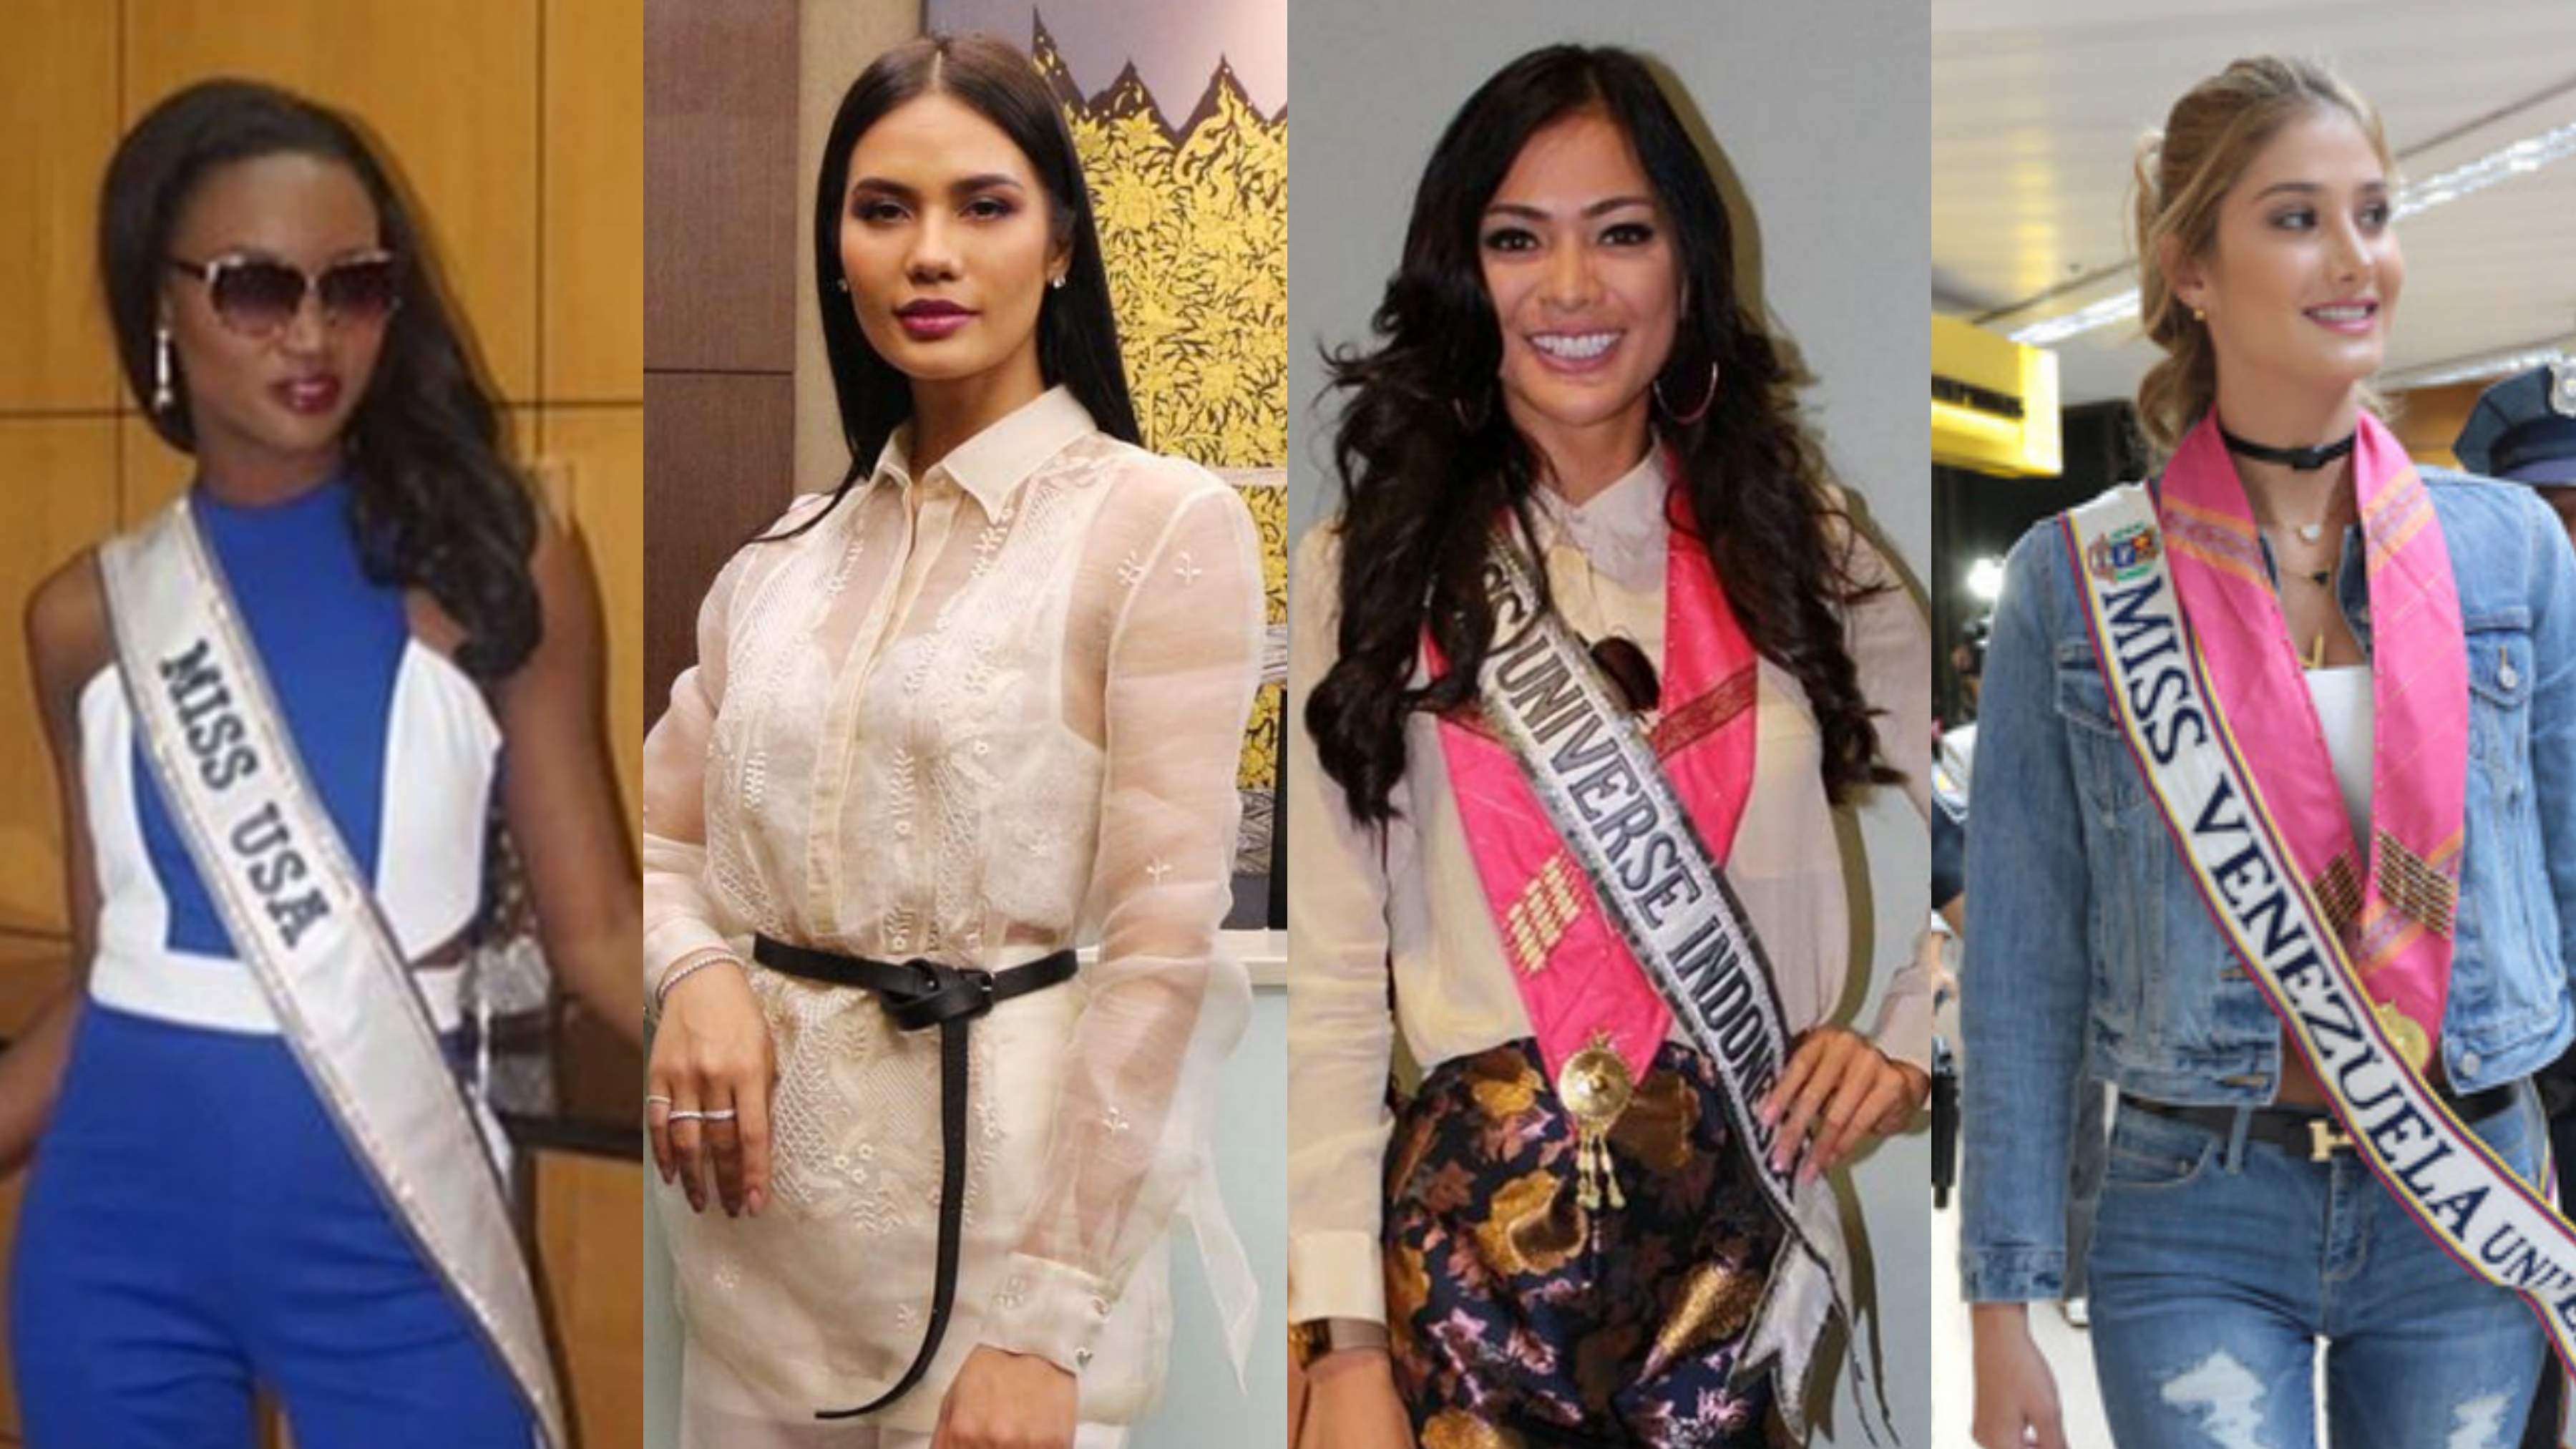 NOW IN MANILA. Miss USA, Thailand, Indonesia and Venezuela are among the candidates who arrived for the Miss Universe 2016 in Manila Photos from Instagram/@deshaunabarber/namtanlitaa/65thmissuniverse/Jedwin Llobera/Rappler  